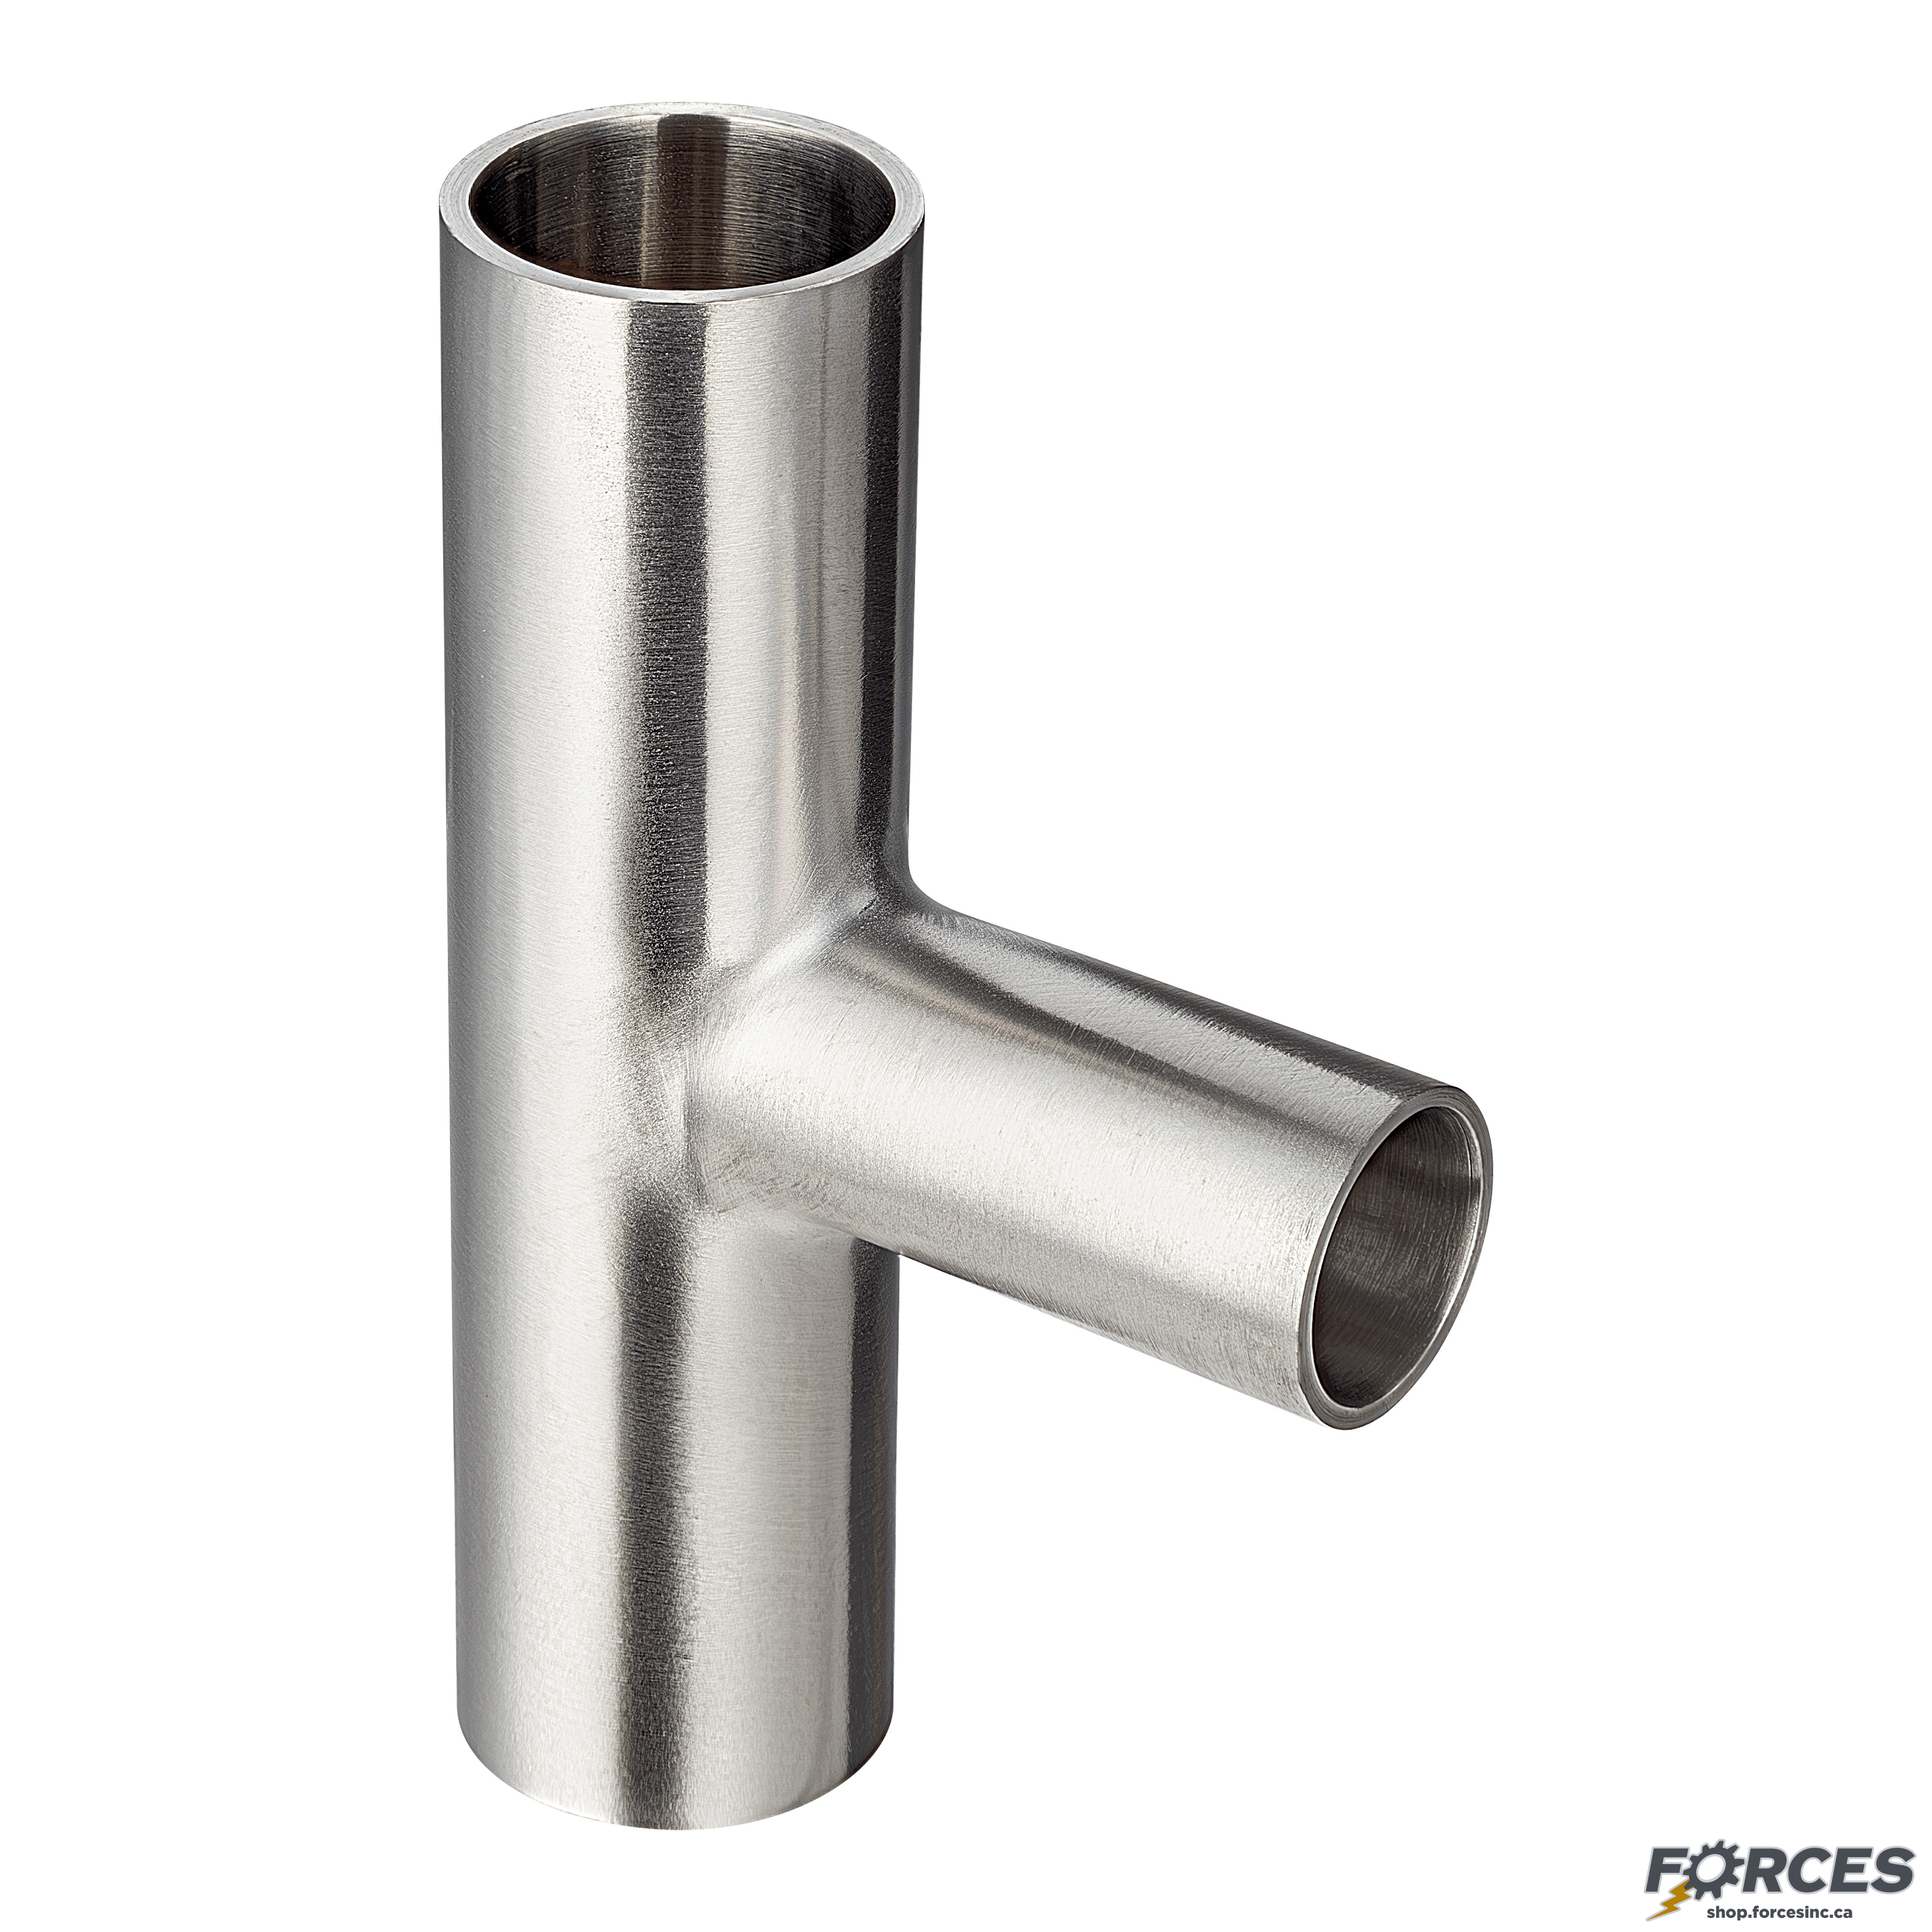 3" x 2" Butt Weld Tee Reducer - Stainless Steel 316 - Forces Inc